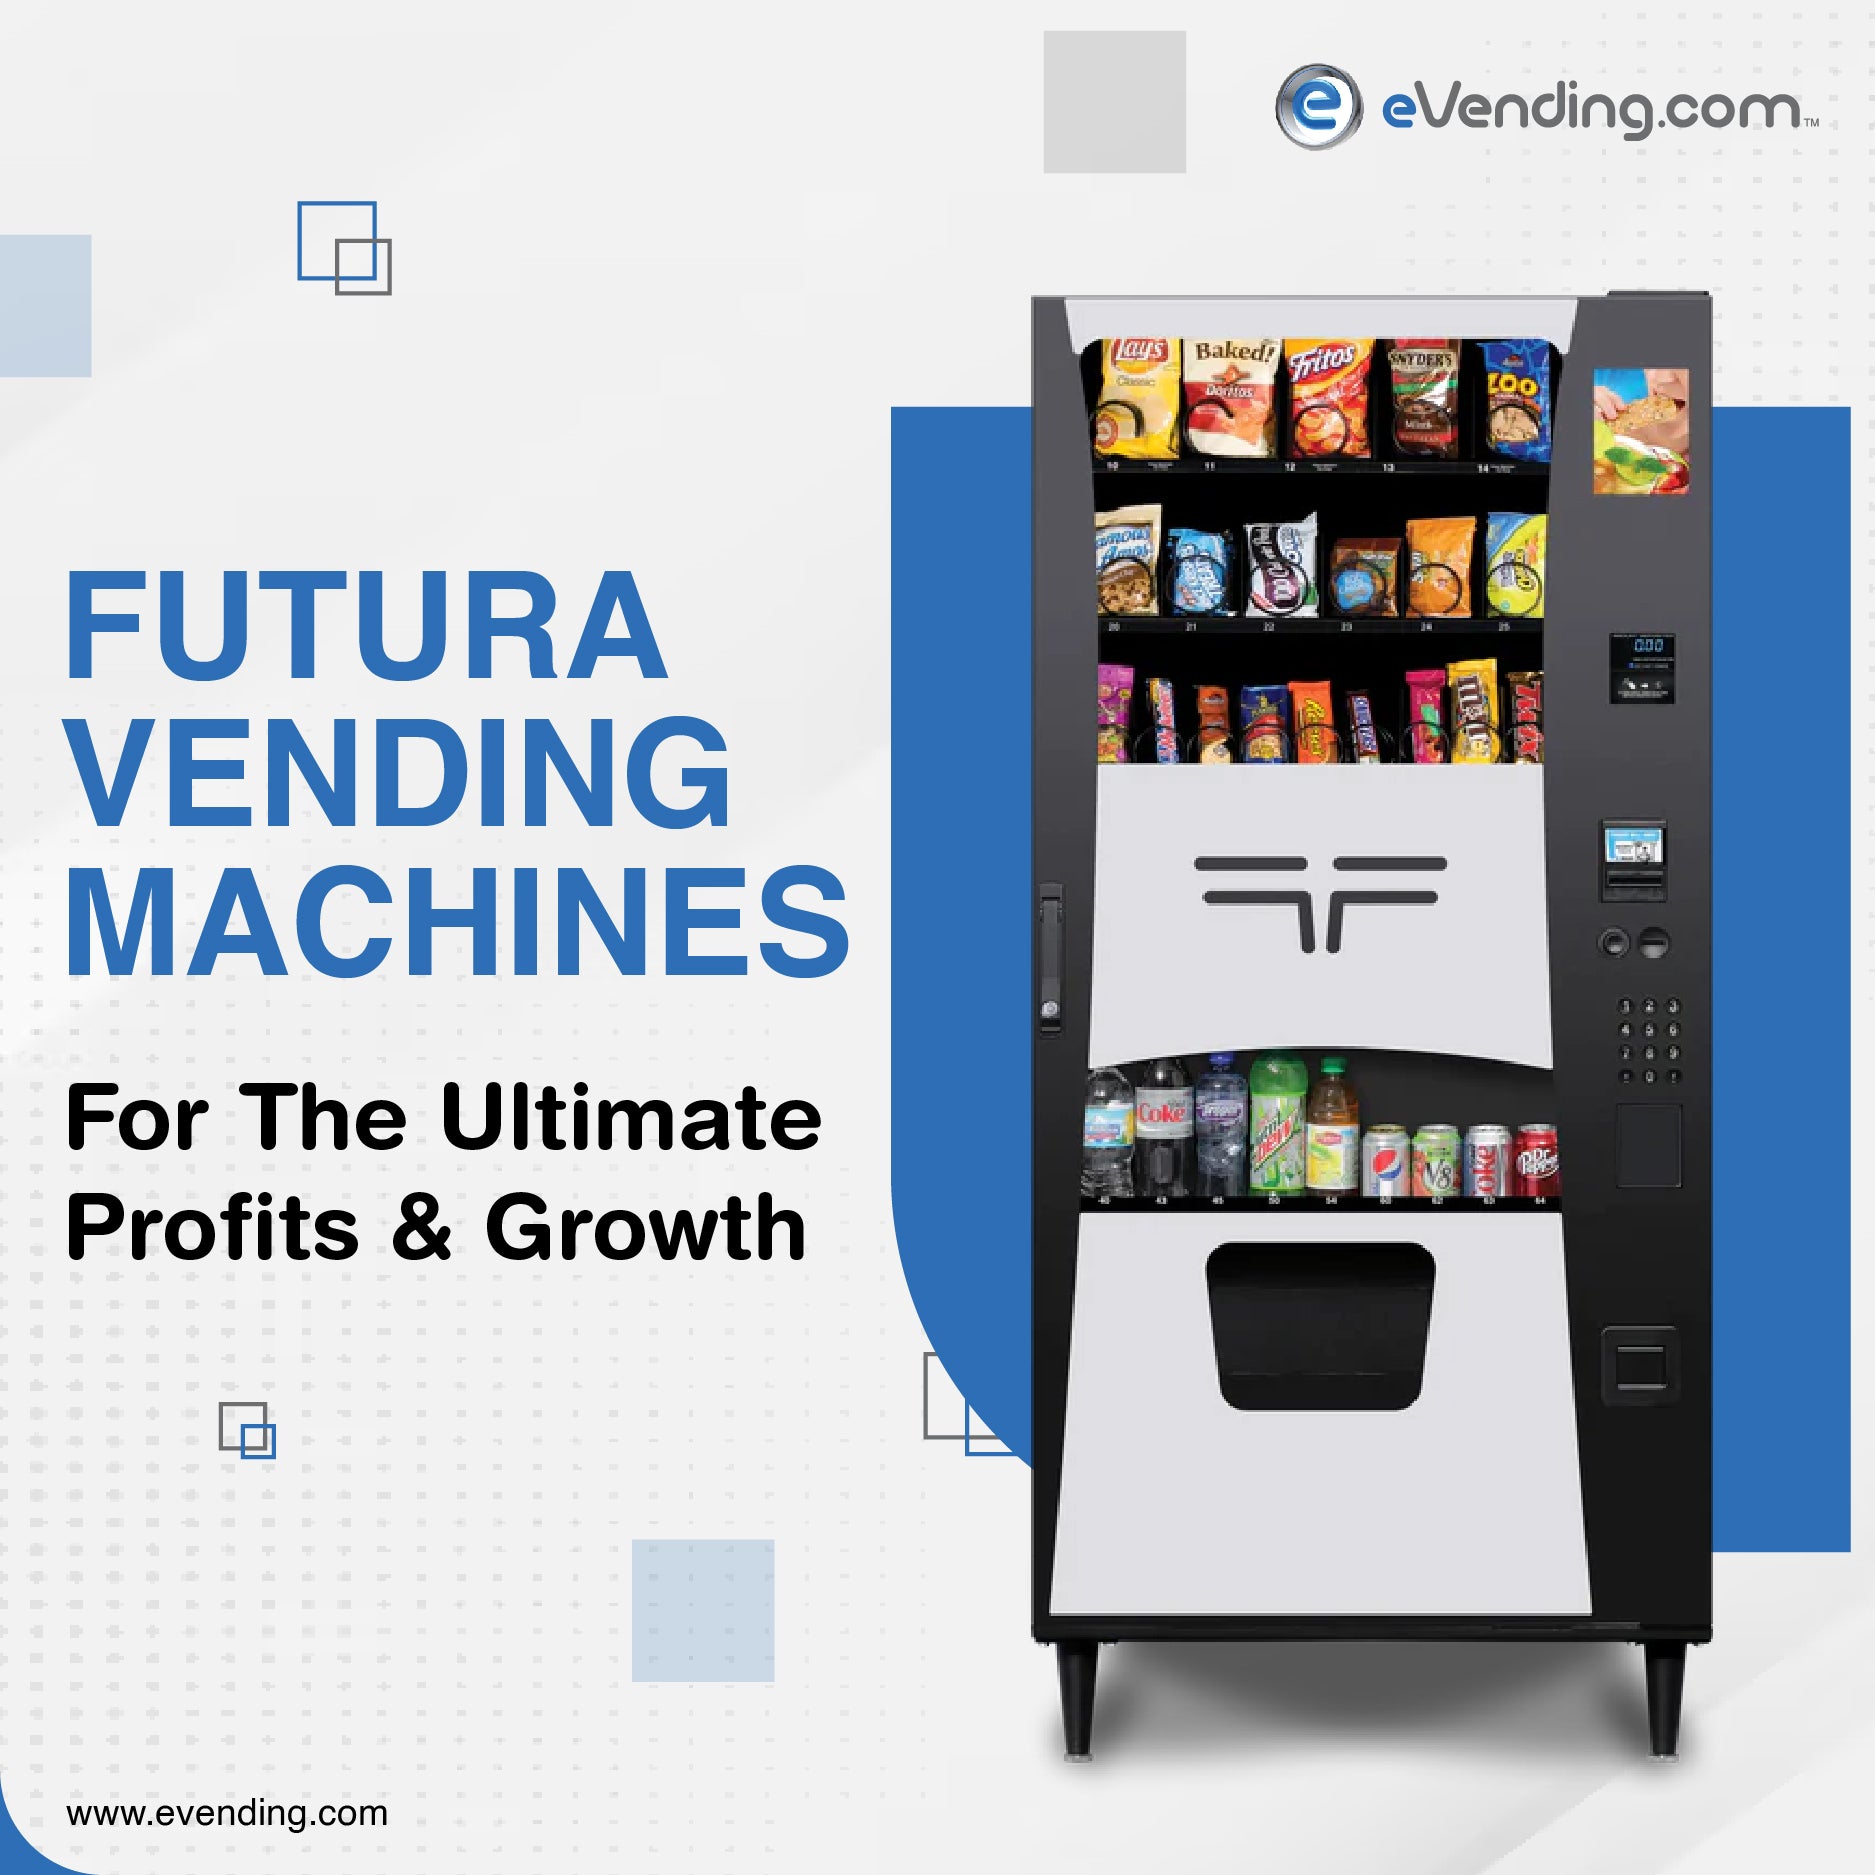 Futura Vending Machines - For The Ultimate Profits & Growth